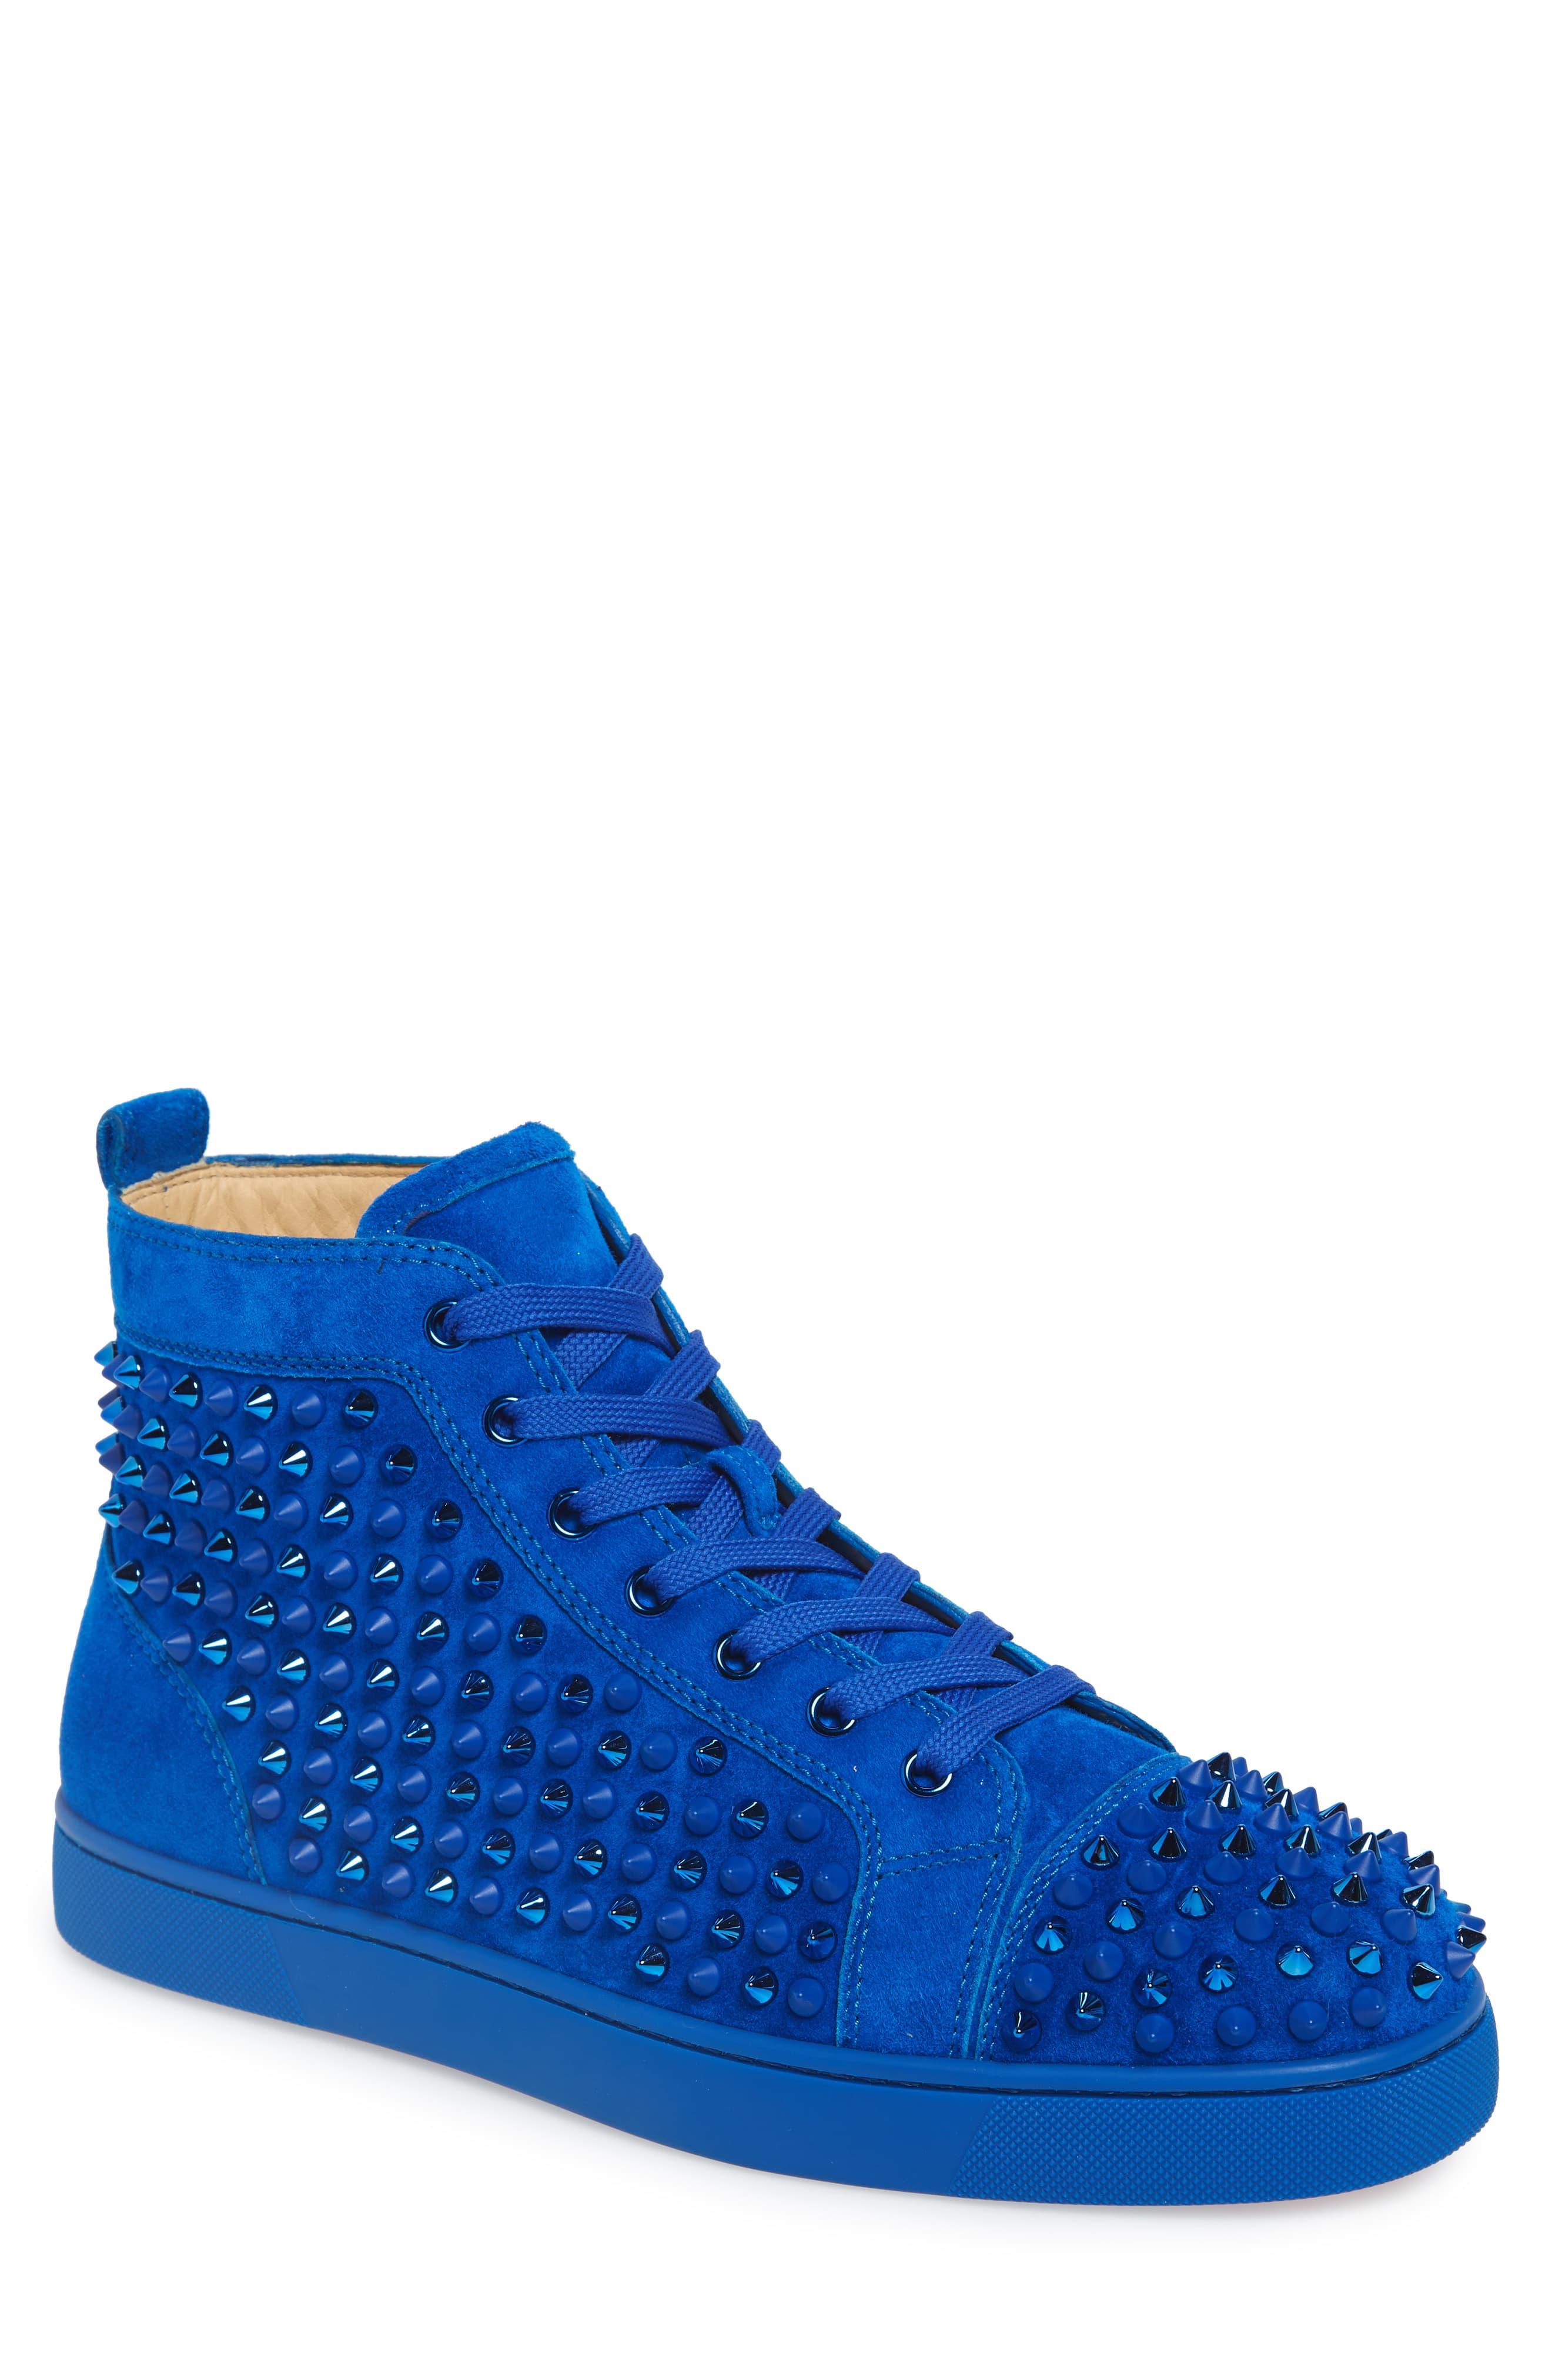 Christian Louboutin Louis Spike Embellished High Top Suede Trainers in ...